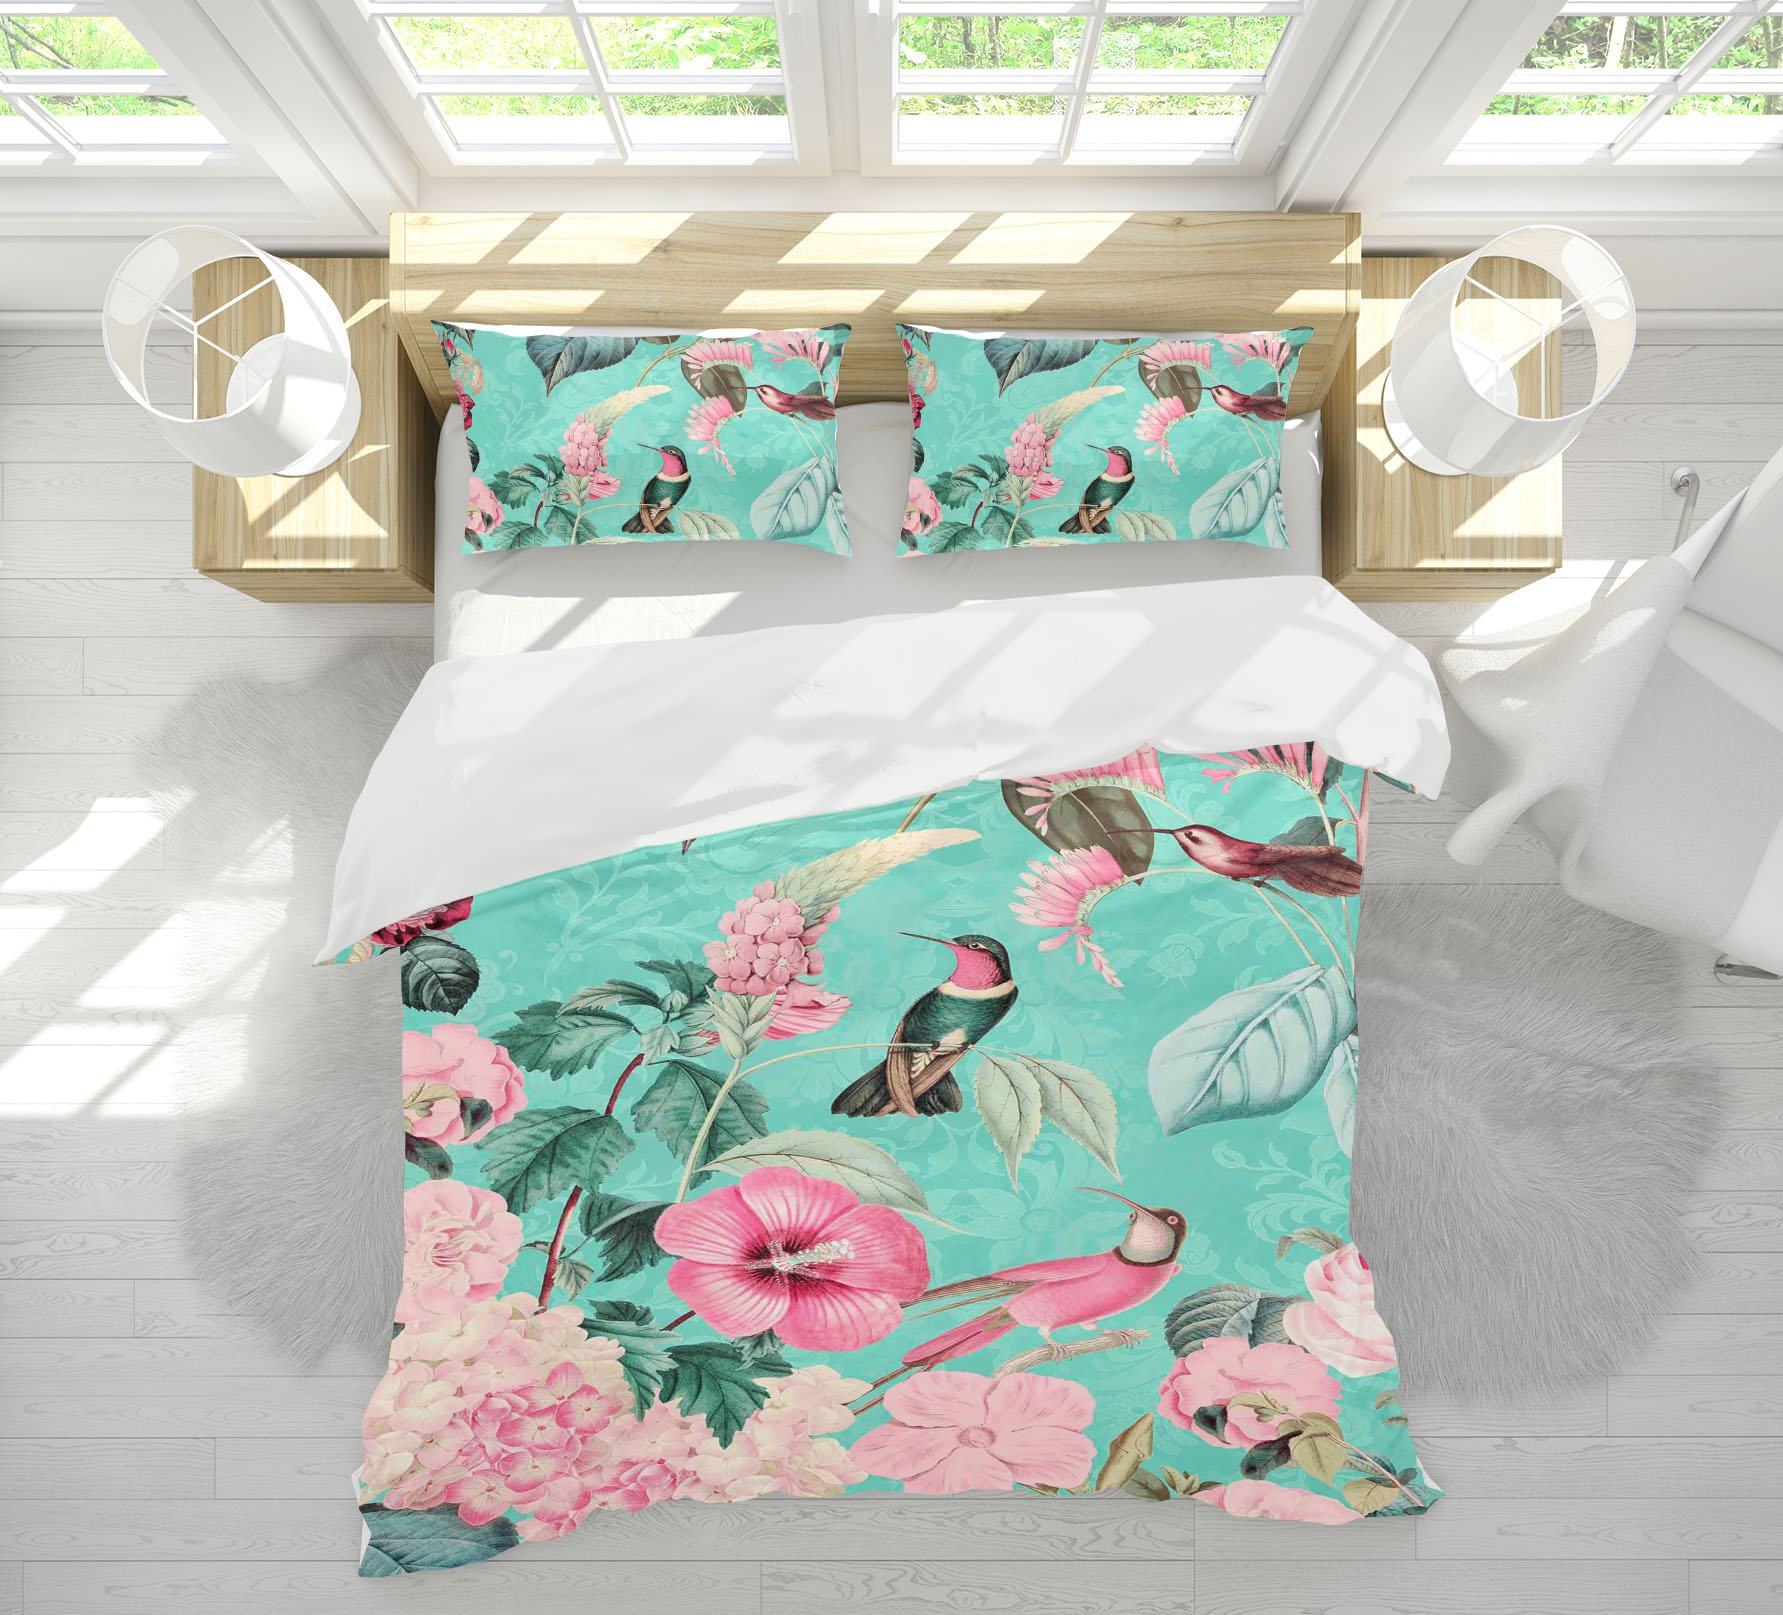 3D Bird Flowers 2120 Andrea haase Bedding Bed Pillowcases Quilt Quiet Covers AJ Creativity Home 